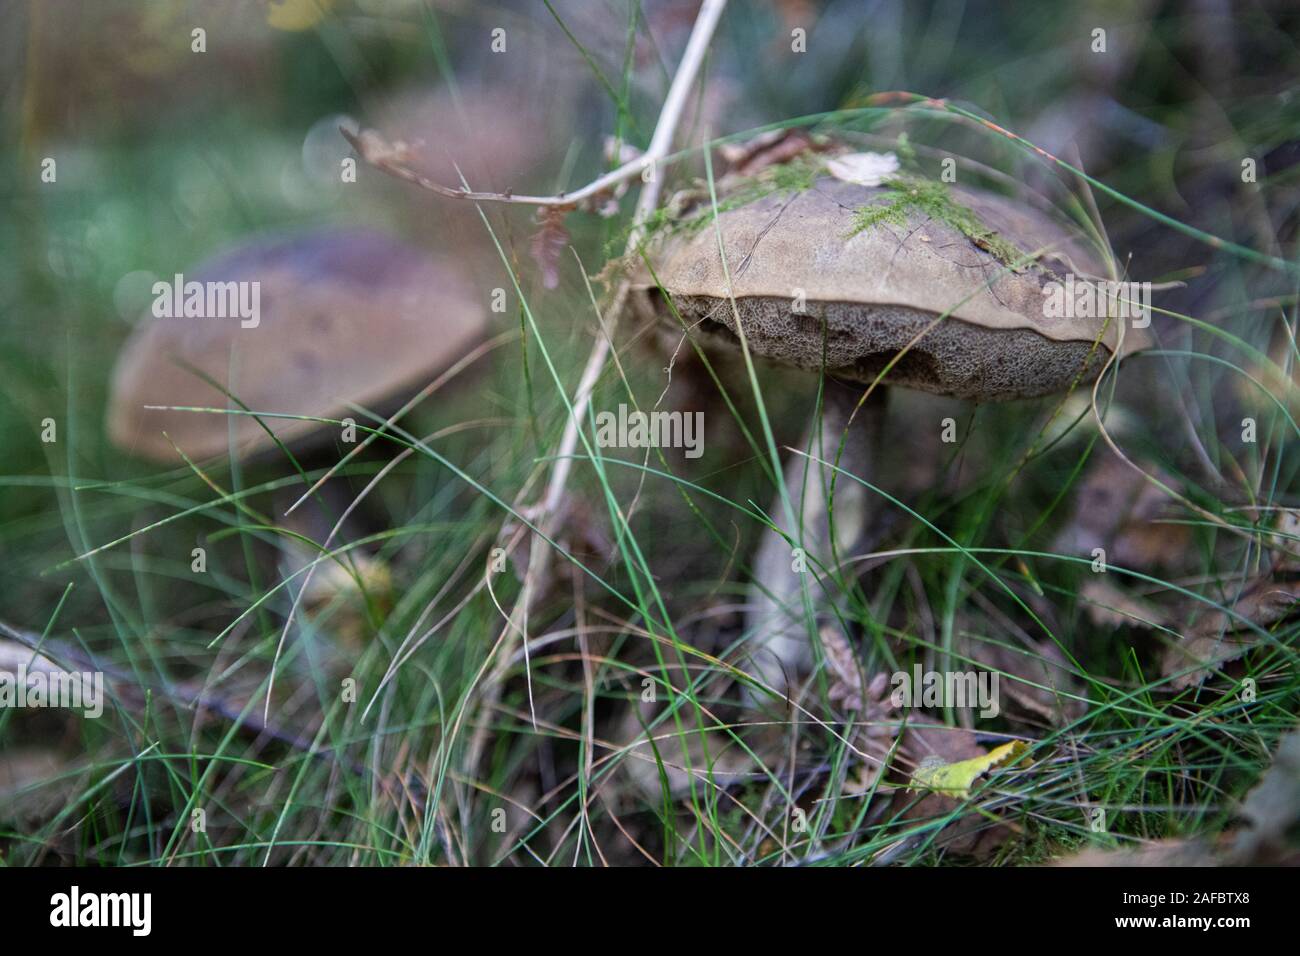 Two birch boletes (Leccinum scabrum) in the forest on the bokeh dreamy background Stock Photo